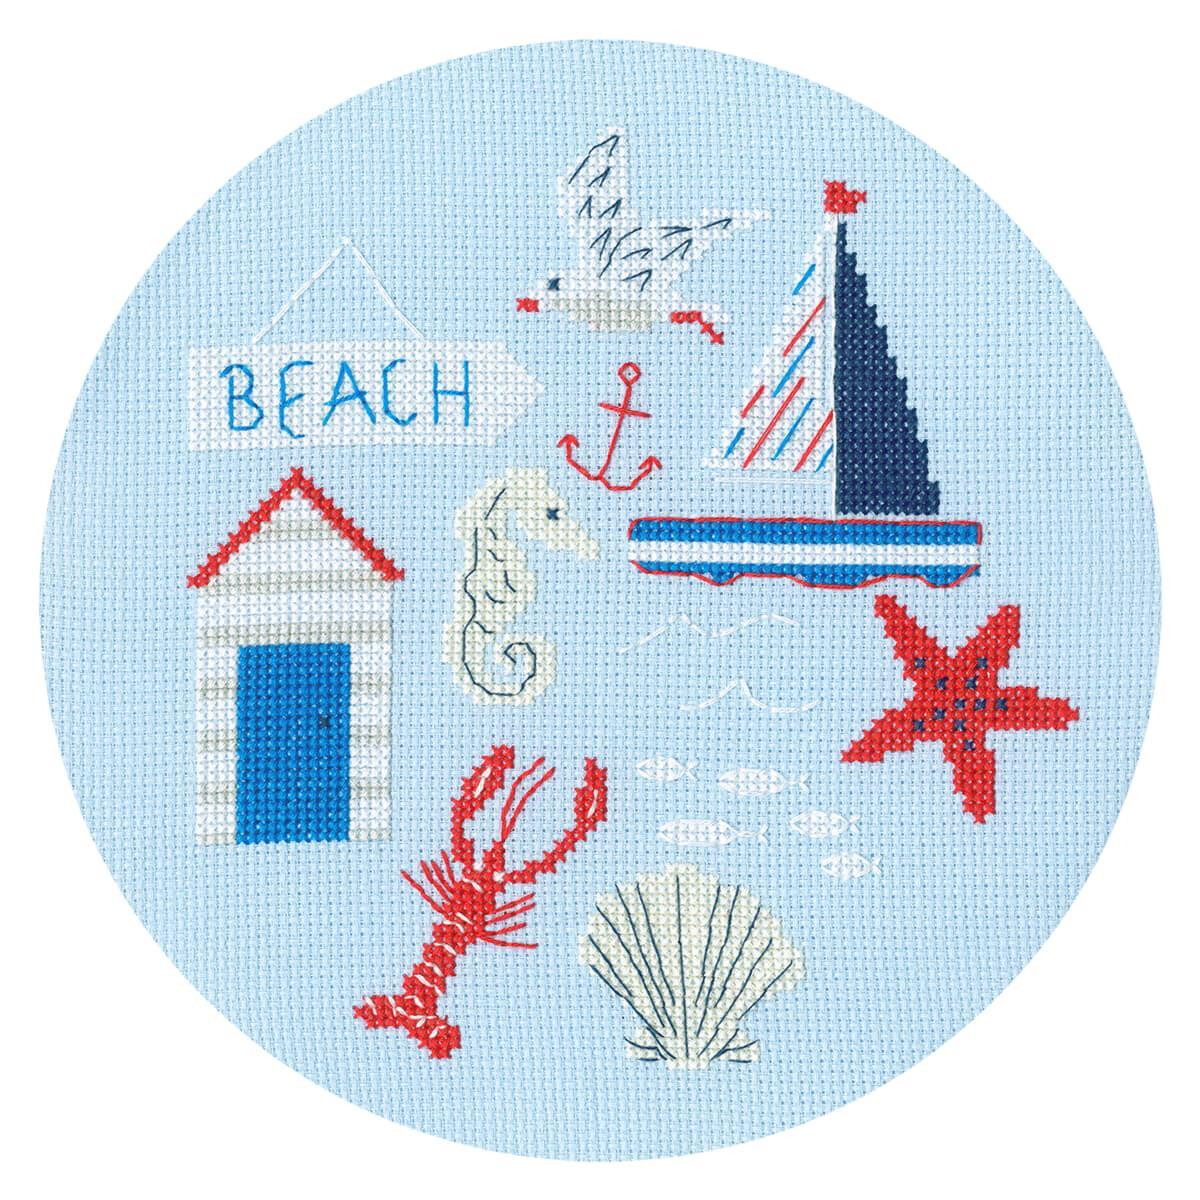 Bothy Threads counted cross stitch kit "Beach",...